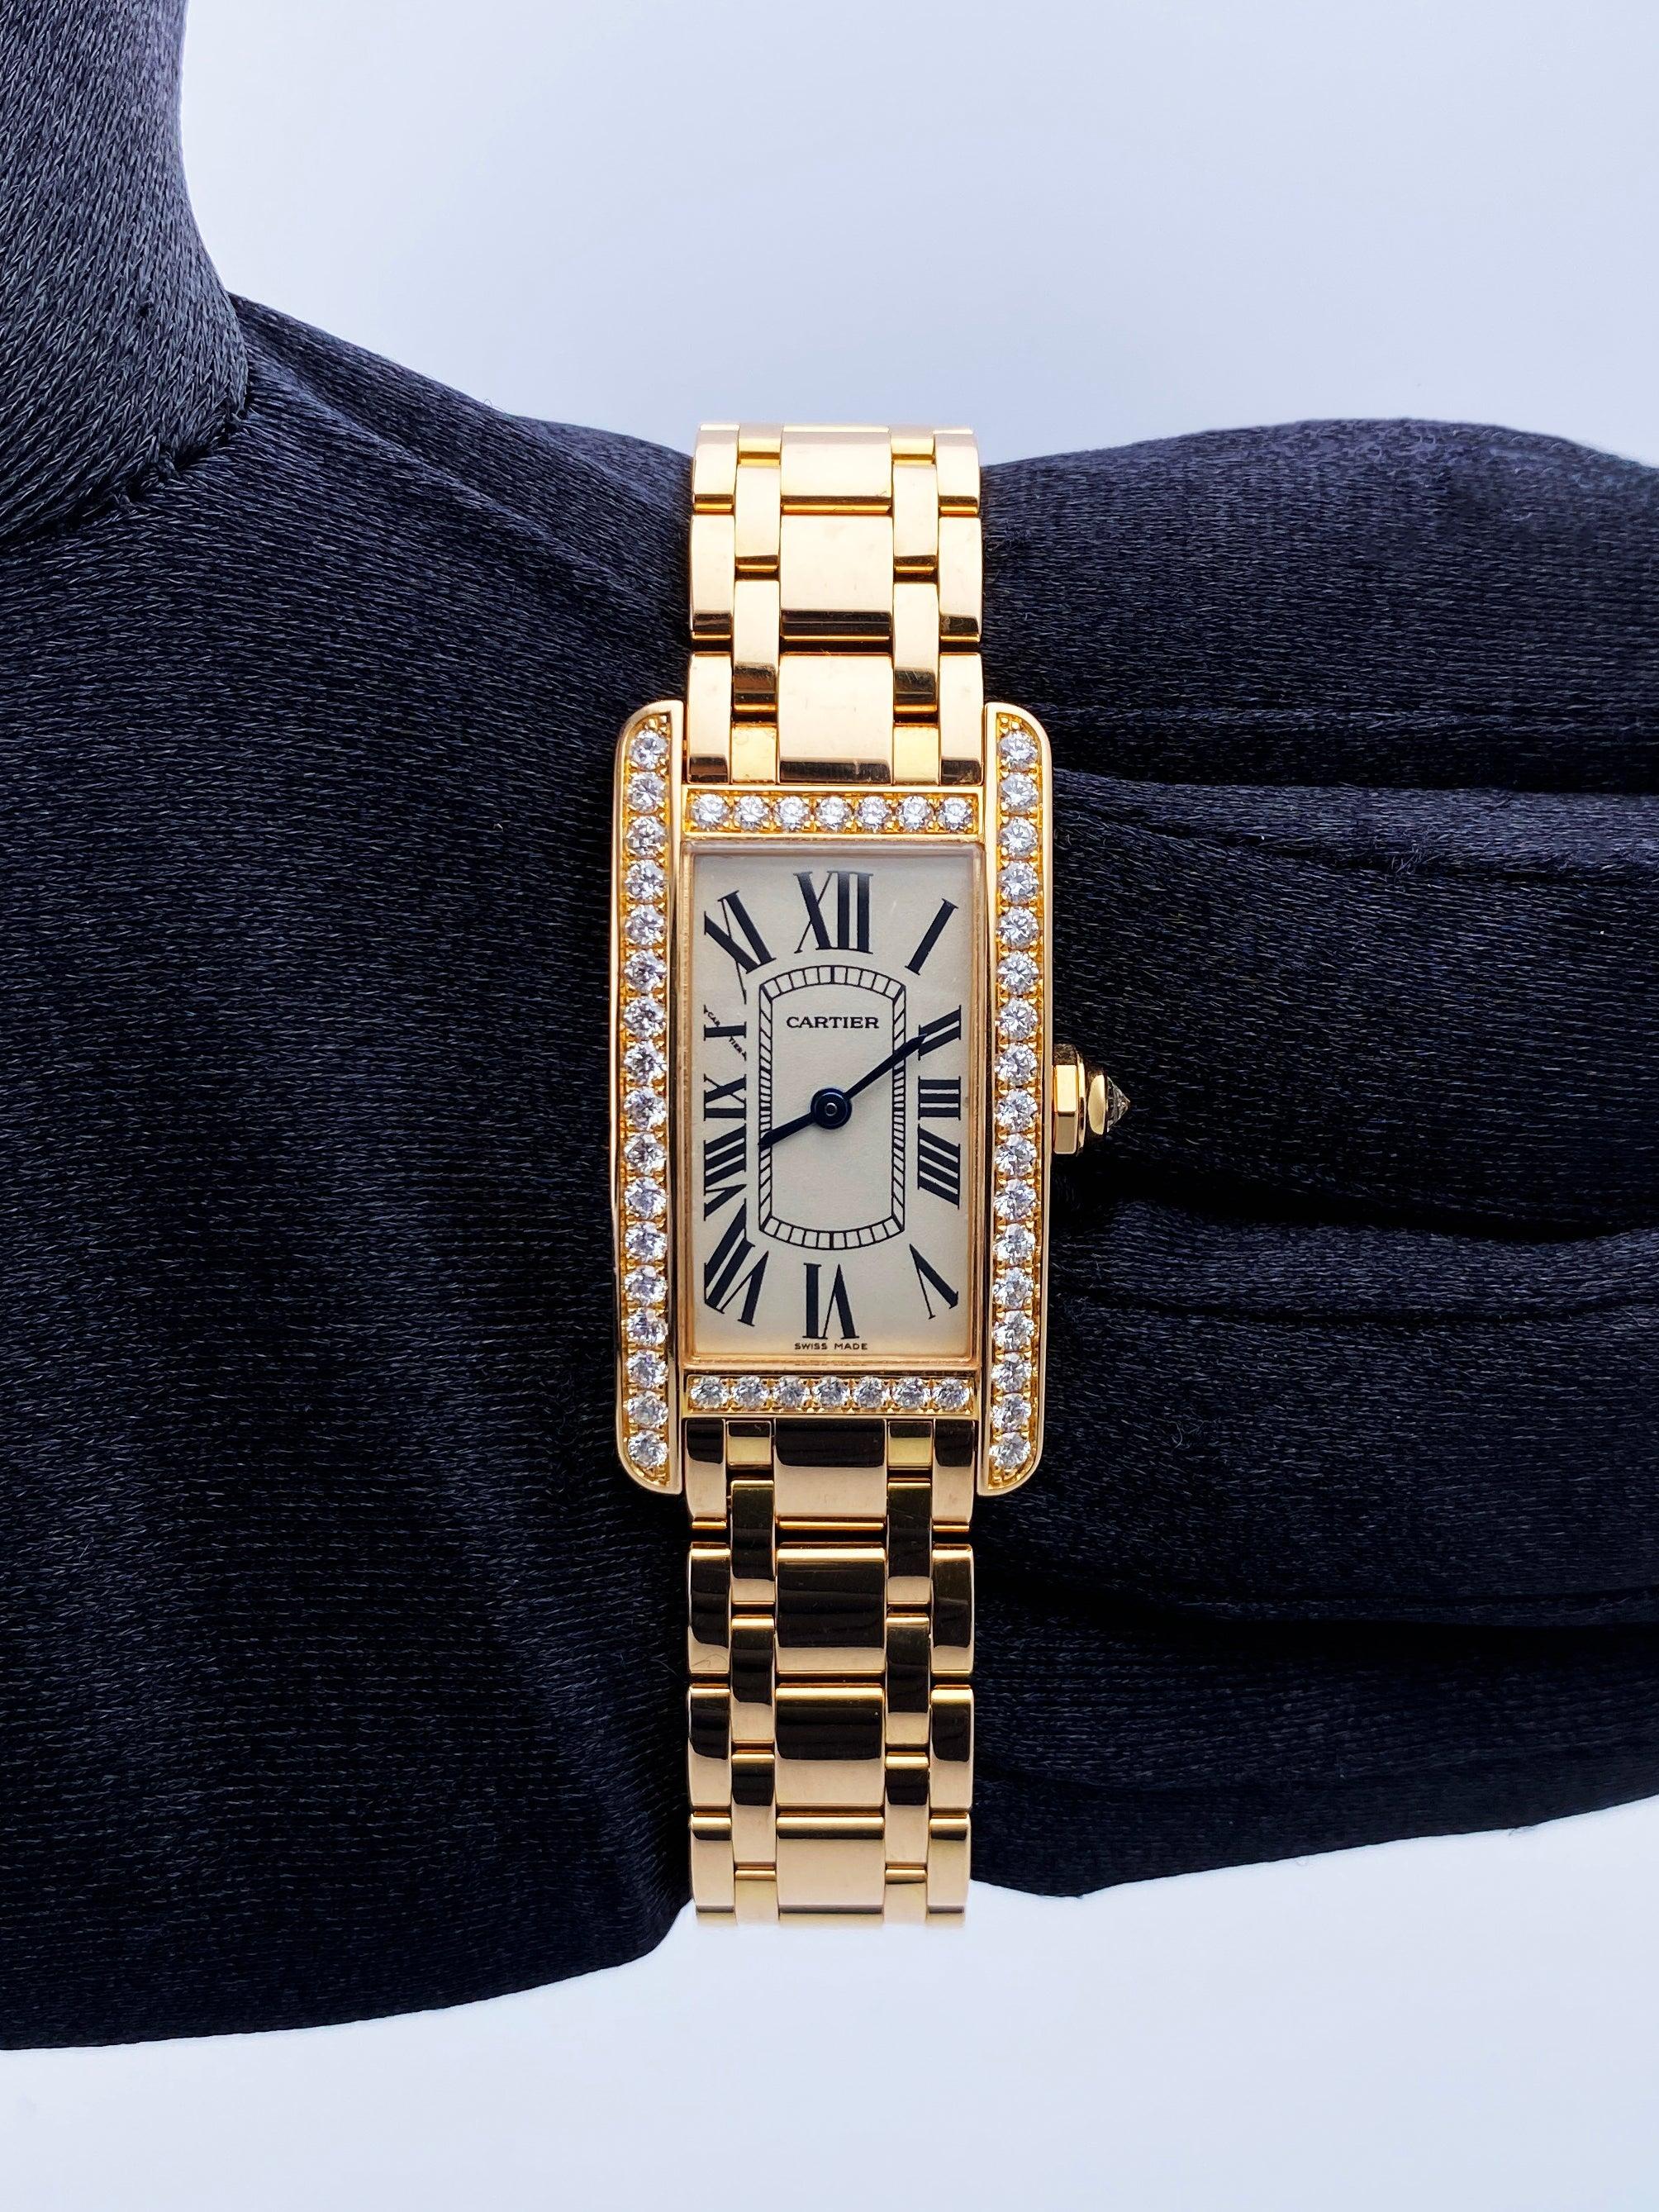 Cartier Tank Americaine WB7079M5 Ladies Watch. 19mm 18K rose gold case. 18K rose gold stationary bezel with original factory diamonds set. Off-White dial with blue steel hands and roman numeral hour markers. Minute markers on the inner dial. 18K